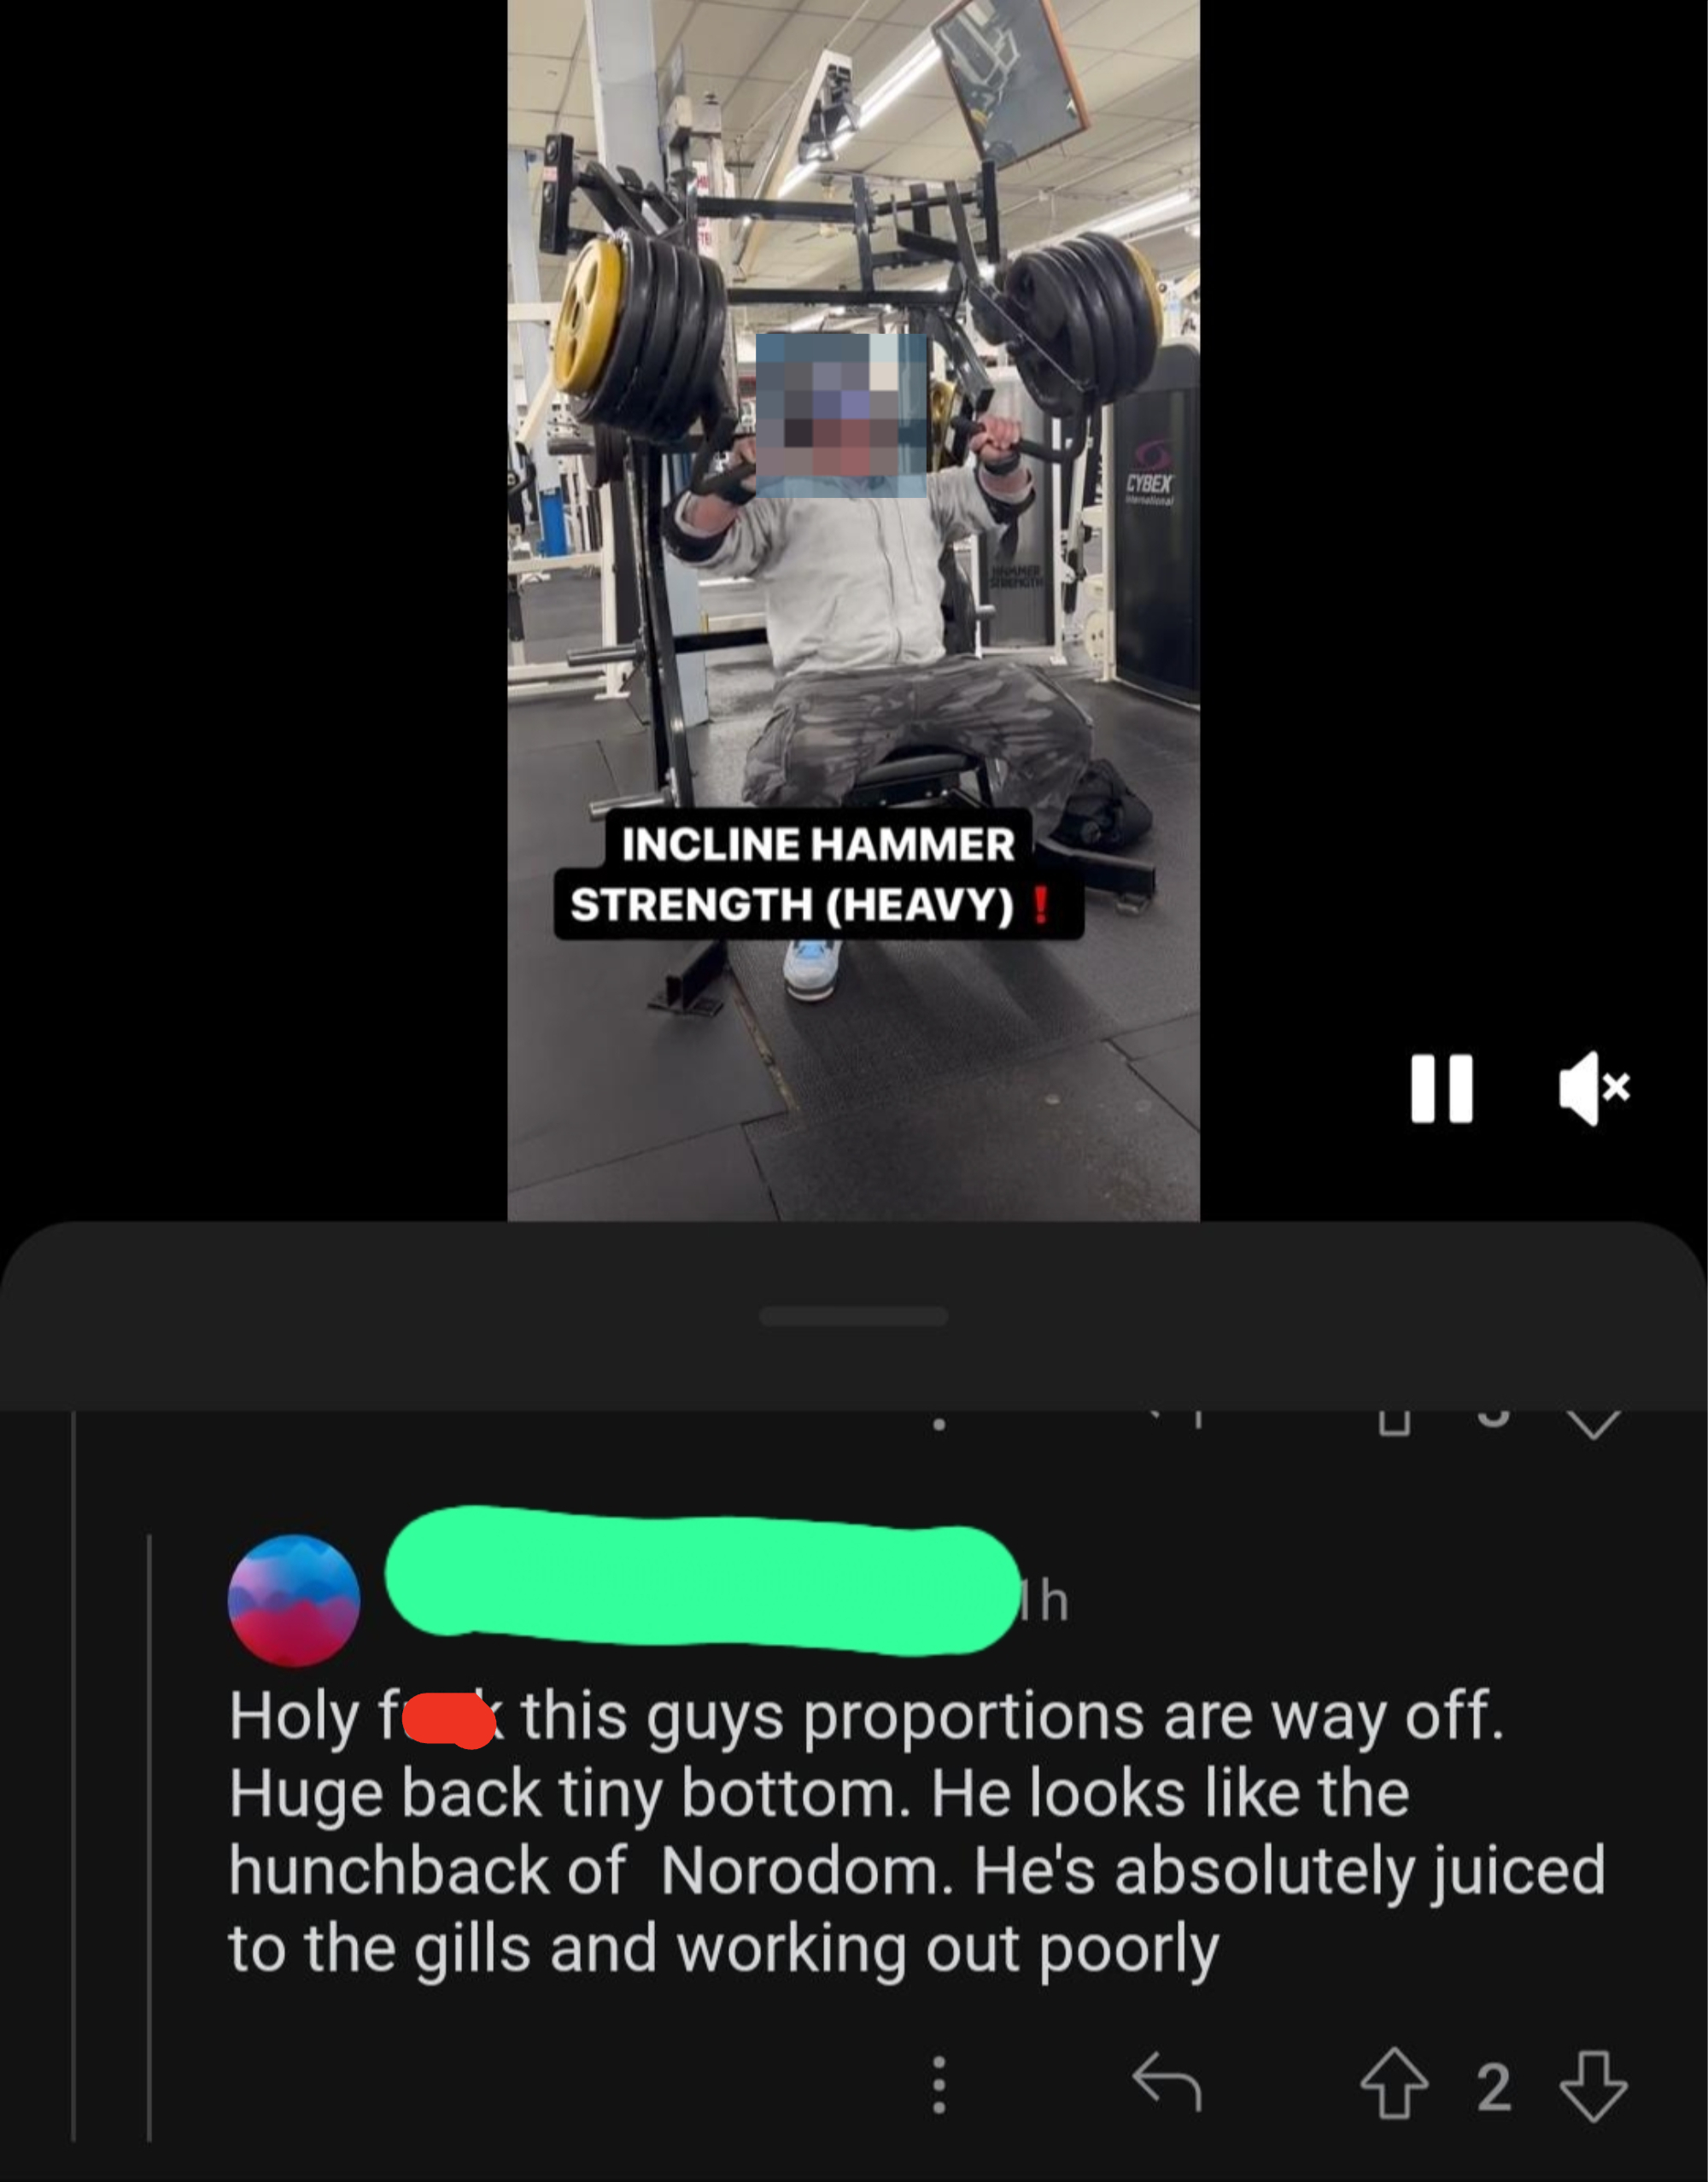 A person lifting heavy weights on an incline bench press machine at the gym. A text overlay and social media comments are present